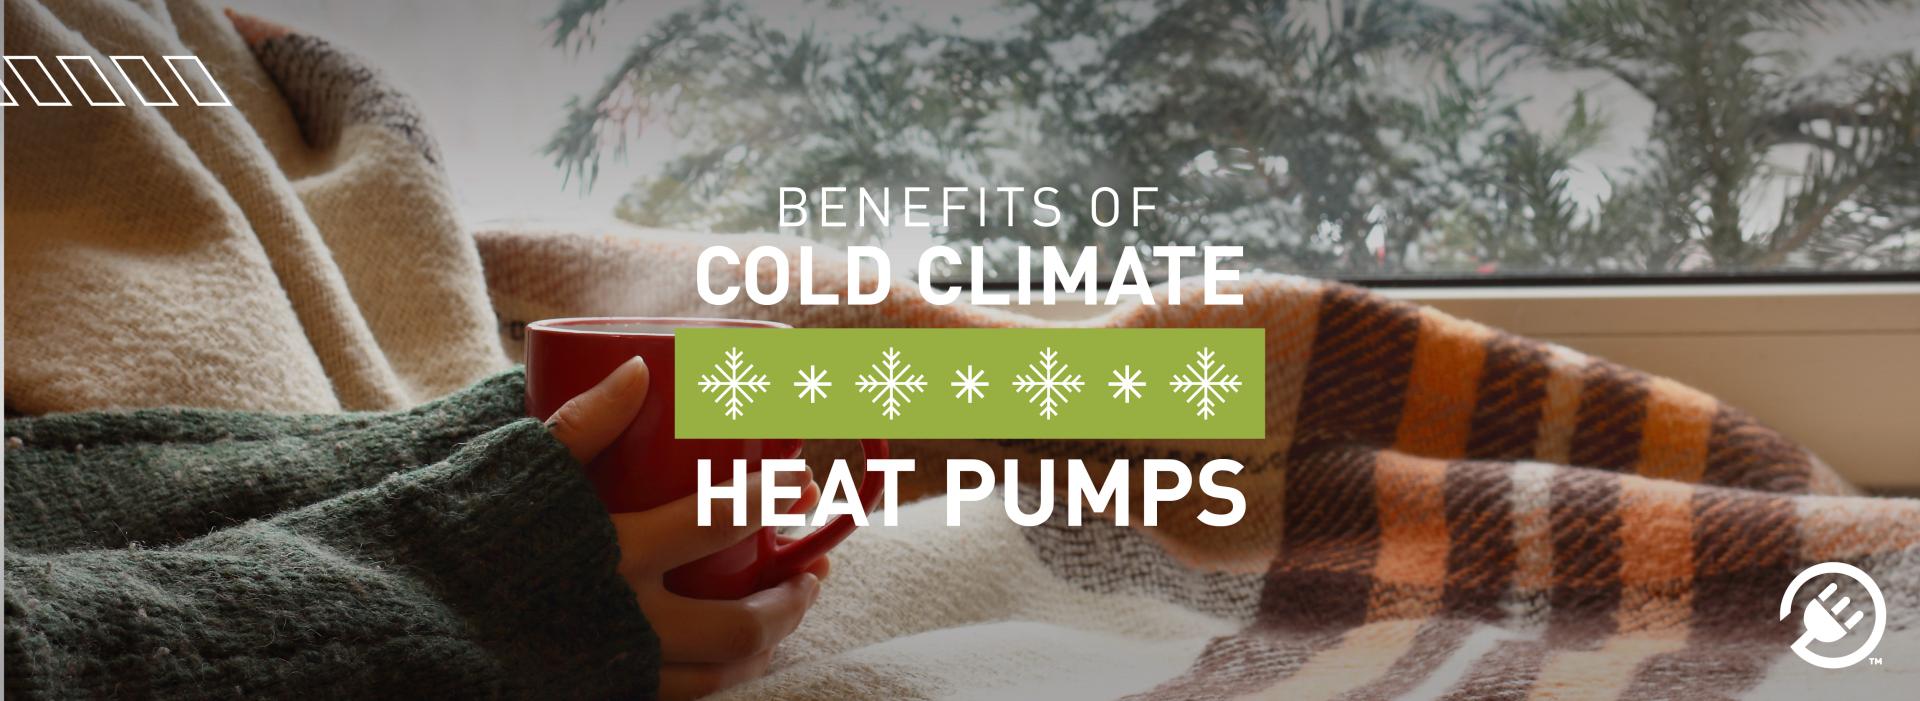 The Benefits of Heat Pumps in Cold Climates